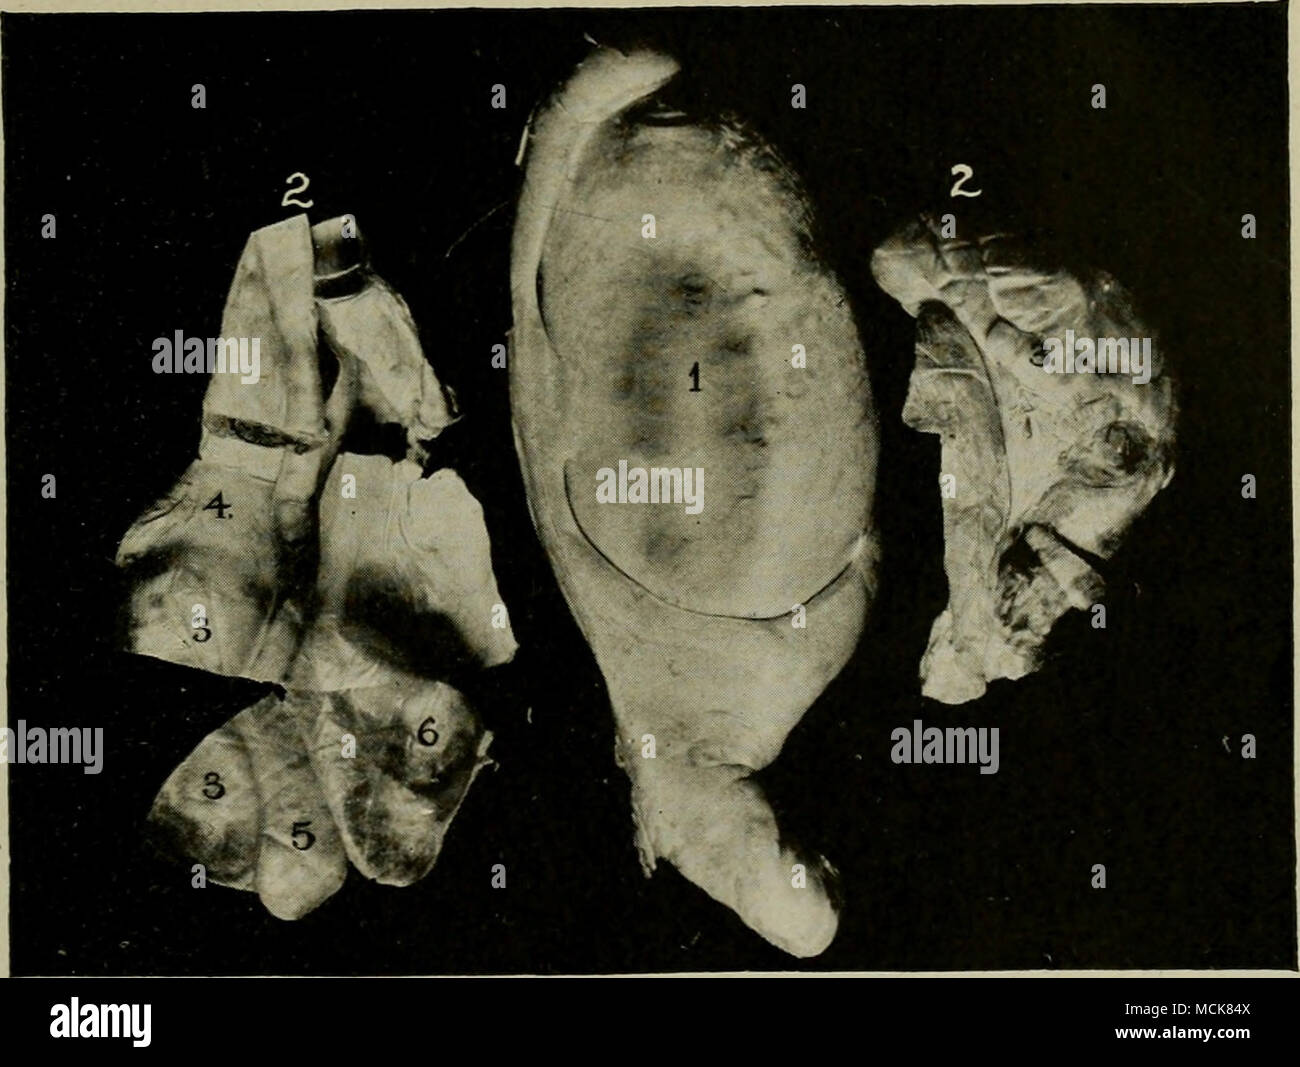 FiG. 122—Degenerative (Atrophic) Orchitis in Young- Bull. /, Normal testis  ; 2, atrophic degenerate testes ; j, body of atrophic gland ; 4, head and, j,  tail of epididymis ; (5